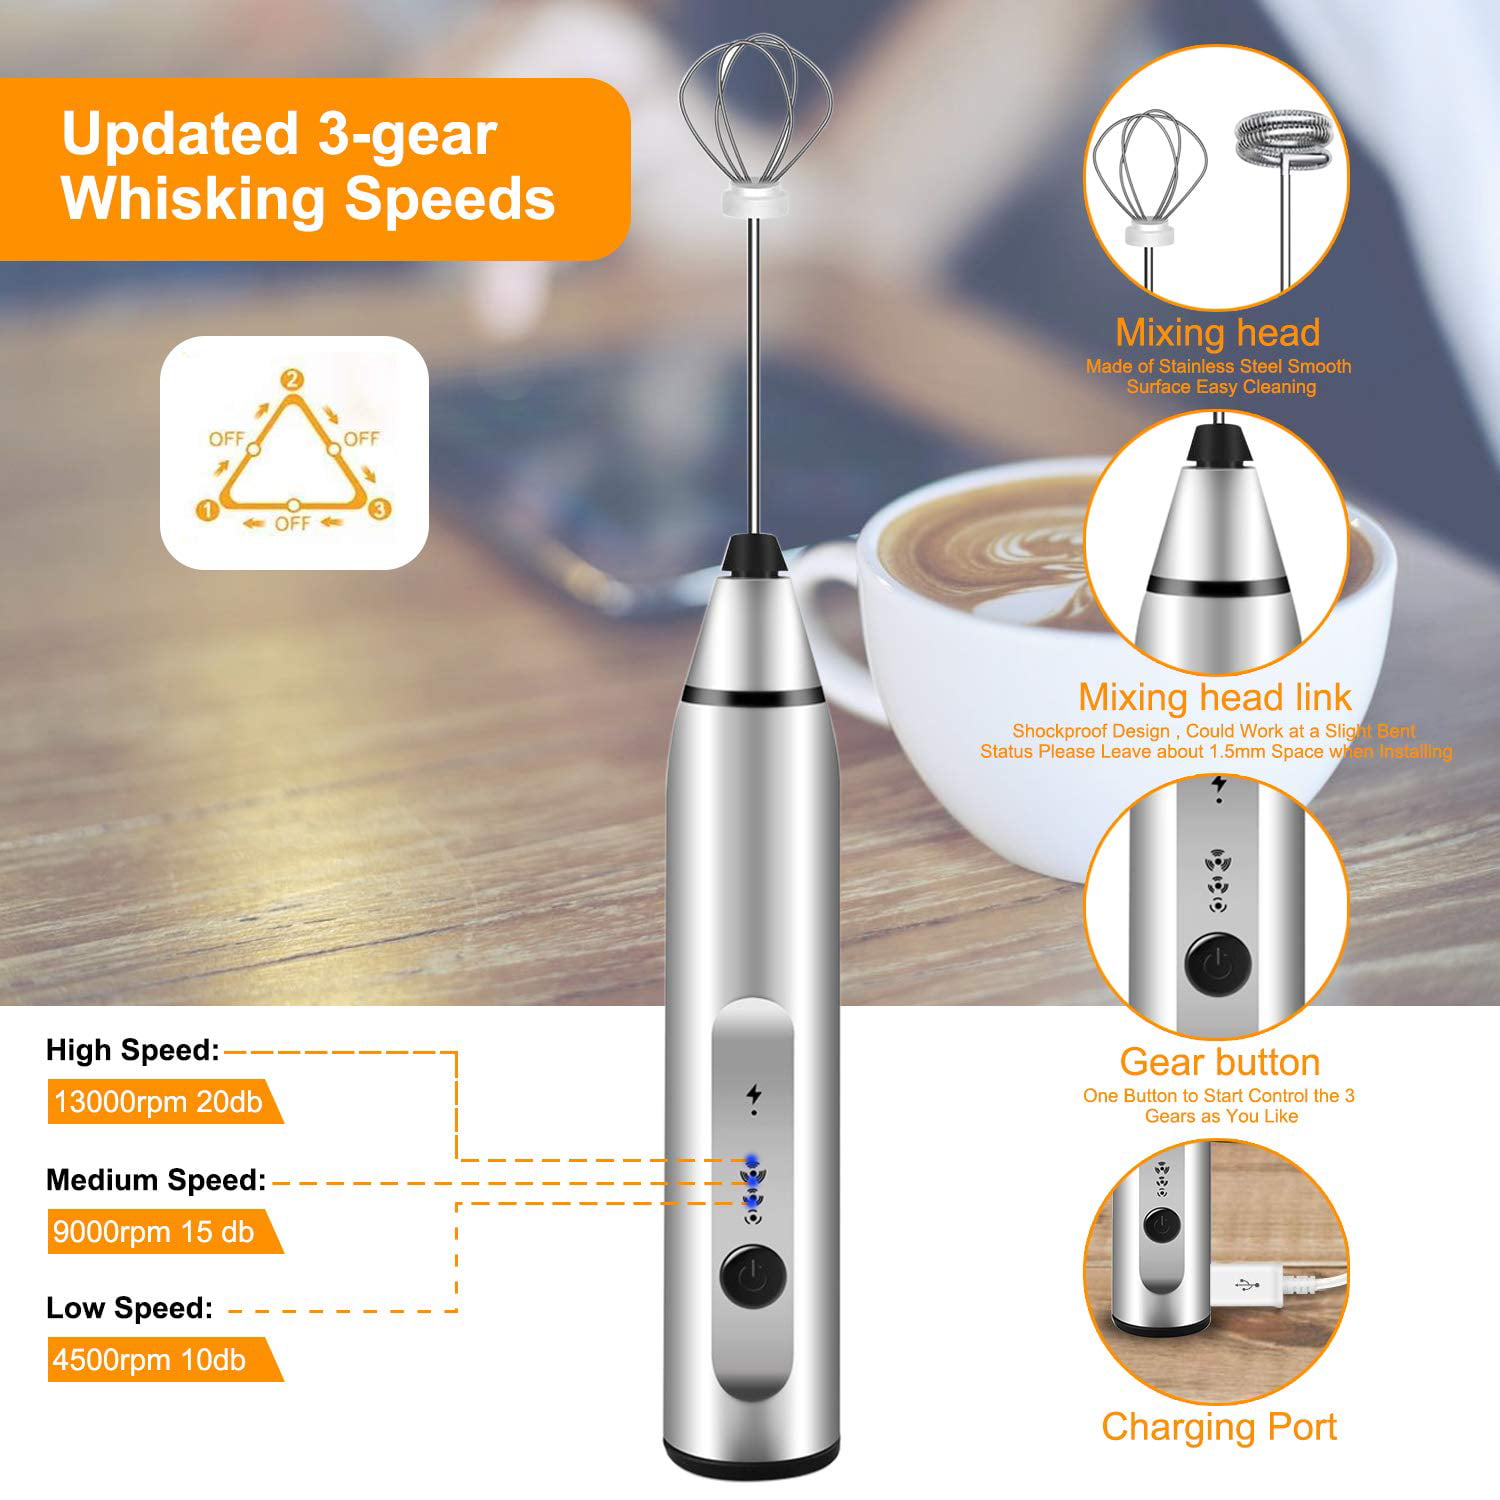 Electric Milk Best Whisk For Eggs Frother Automatic Cream Whipper Coffee  Shake Mixer Electrics Hand Held Cappuccino Beater Drink Blender From  Water2018, $1.24